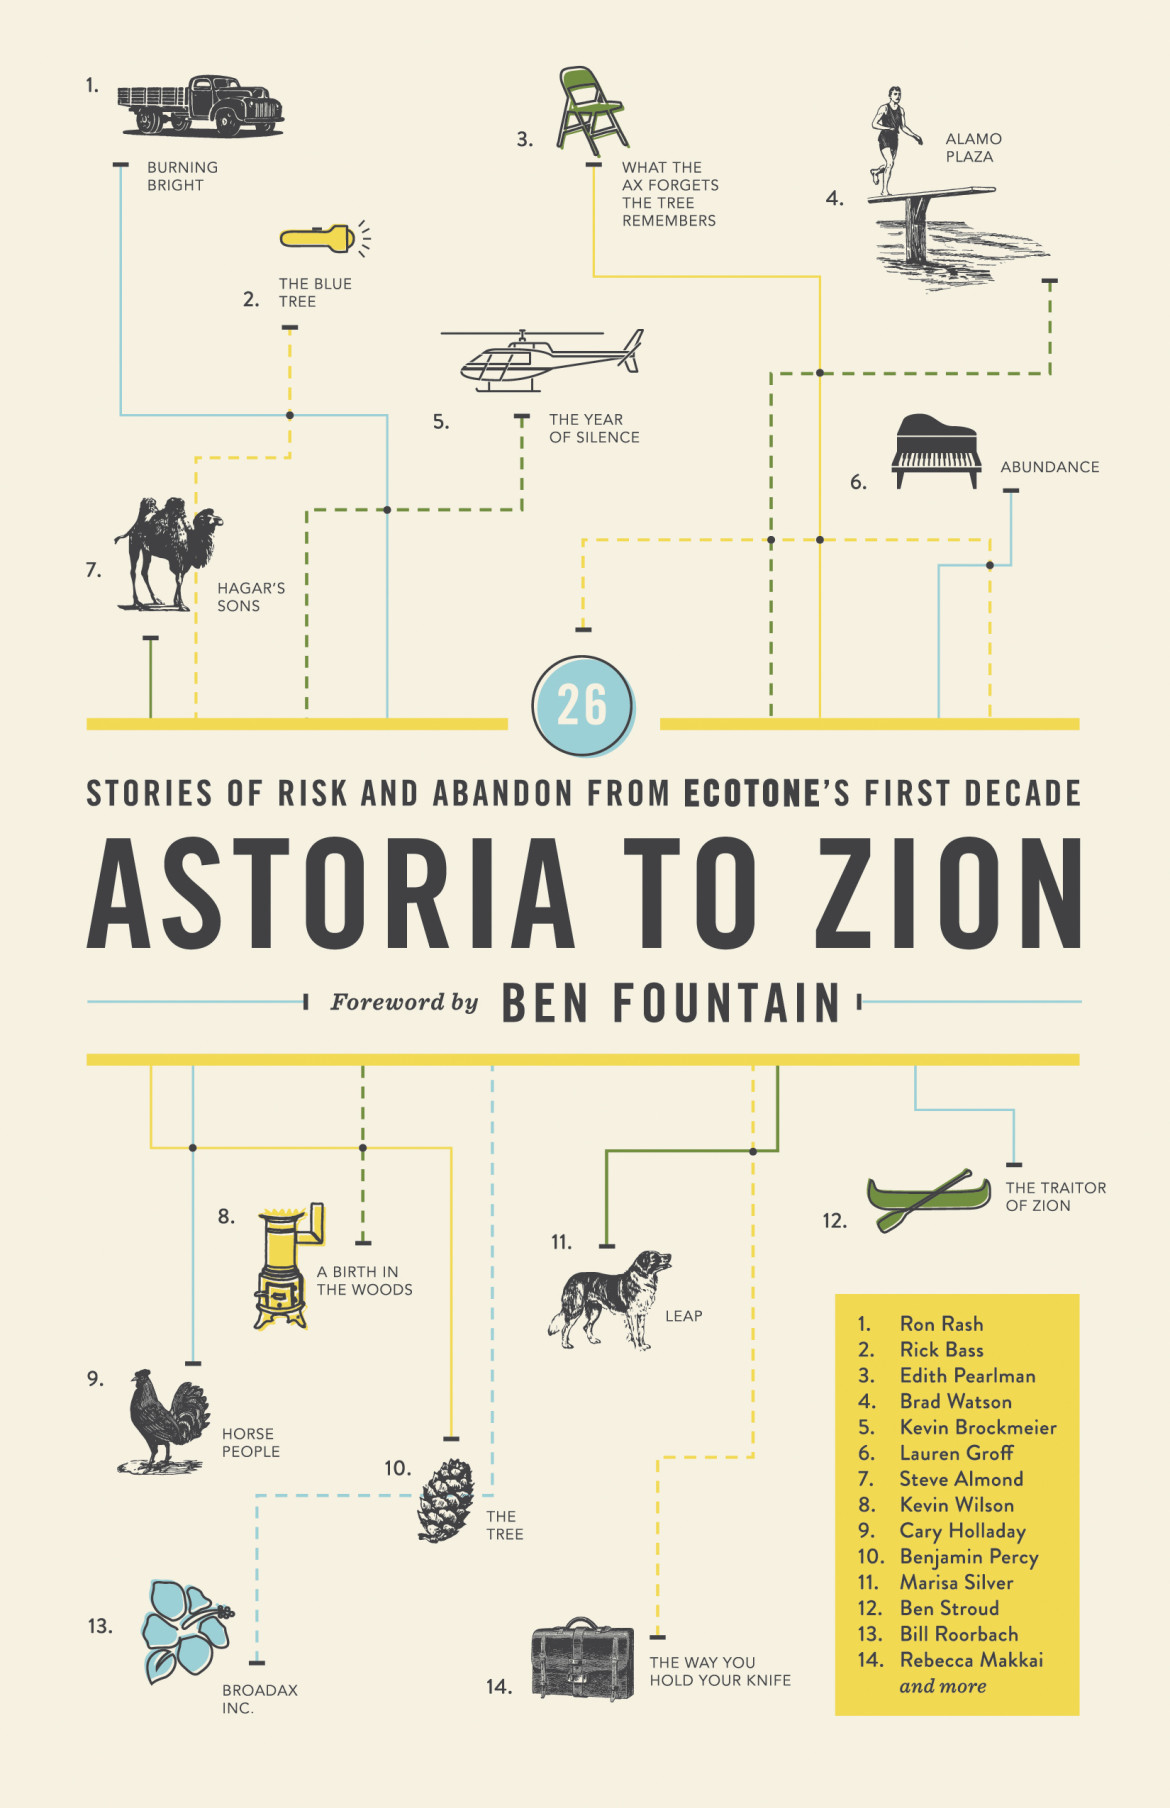 "Astoria to Zion" is a collection of short stories from Ecotone Magazine